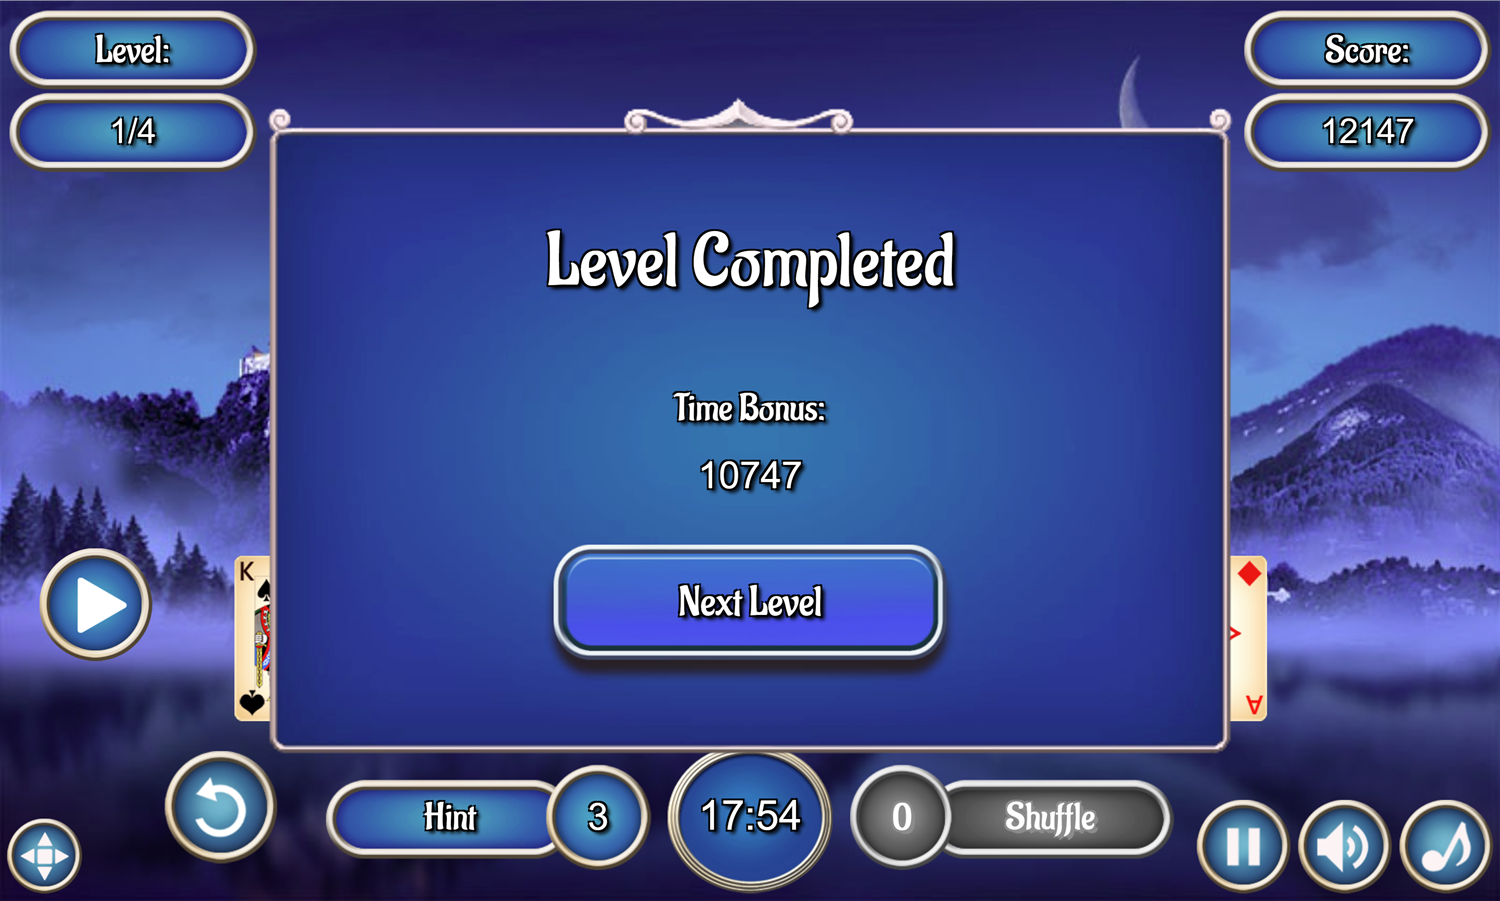 Crescent Solitaire Game Level Completed Screen Screenshot.